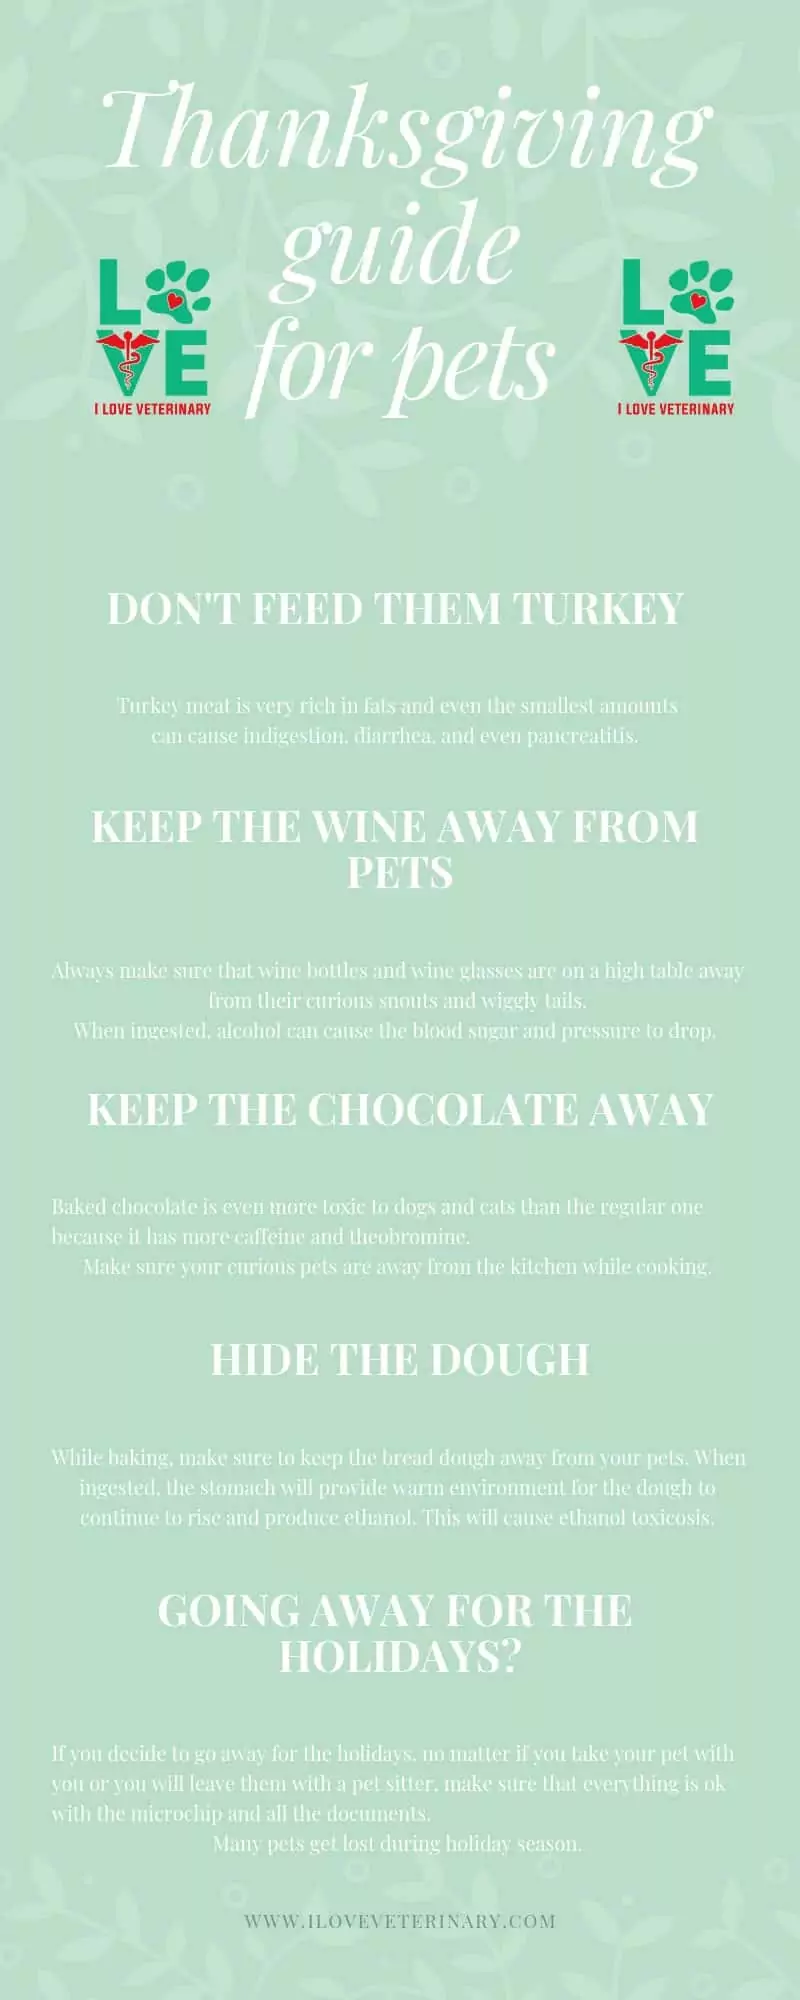 holiday, thanksgiving, pets, Thanksgiving guide for pets